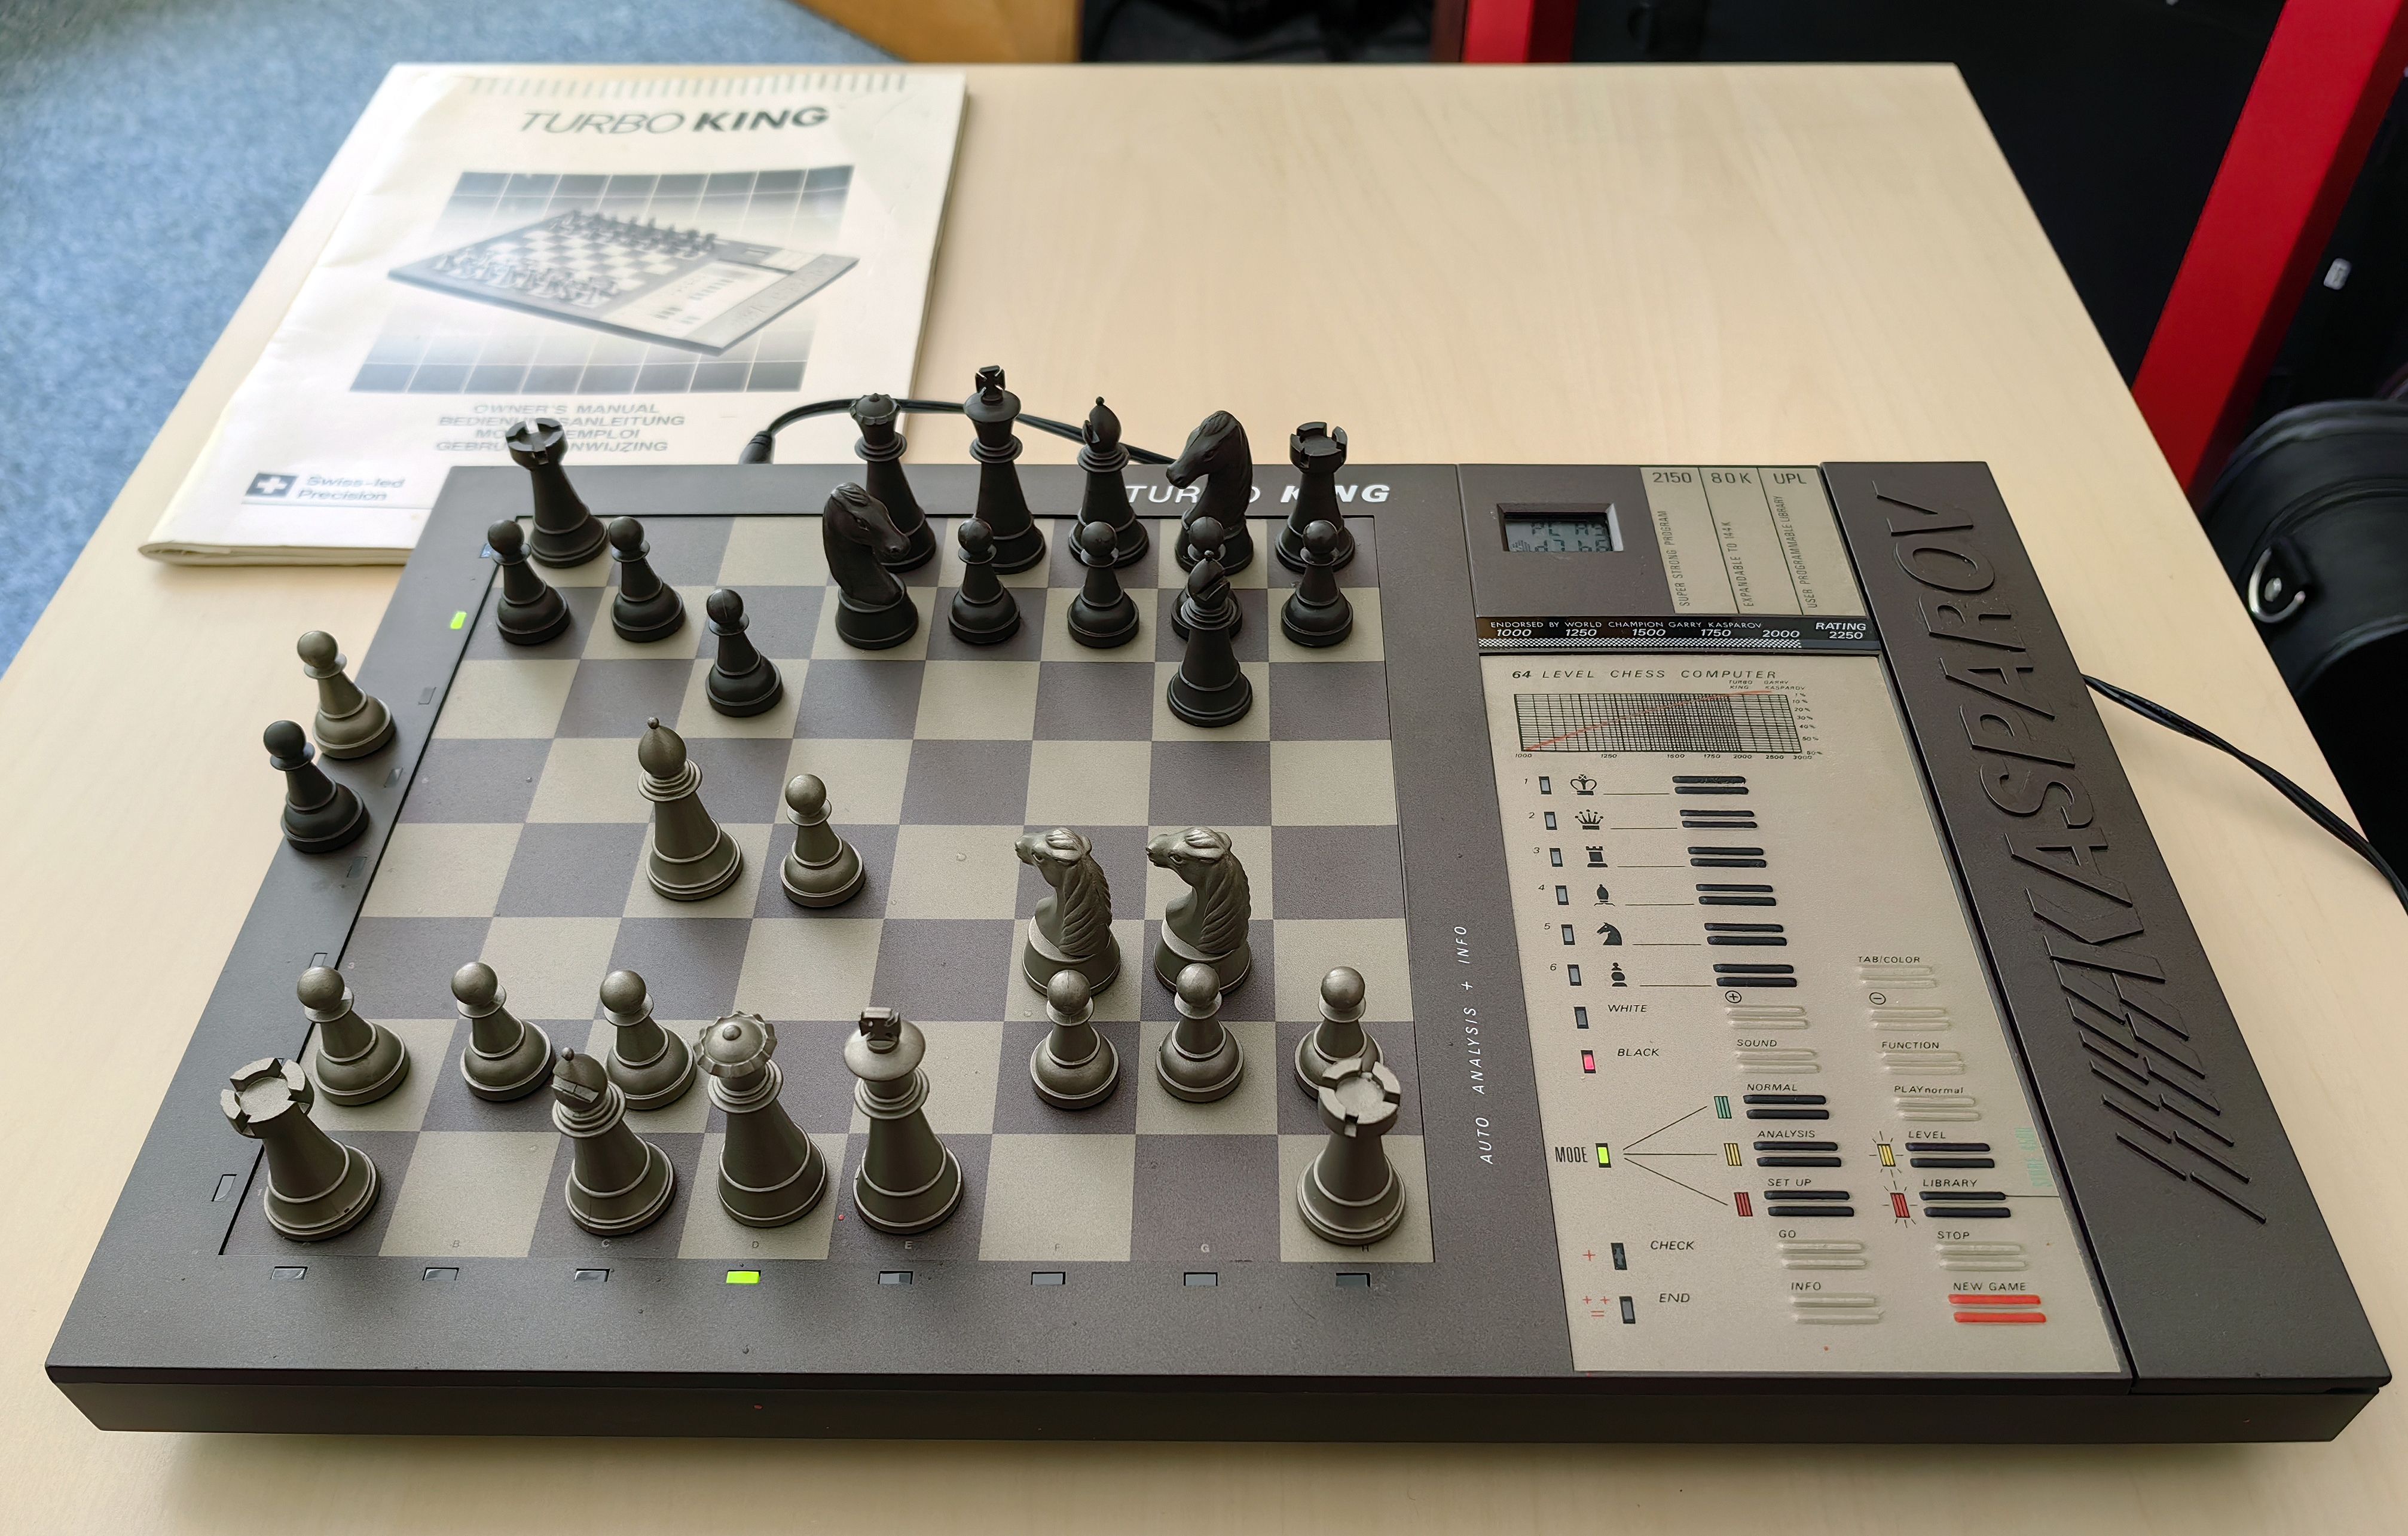 Playing Stockfish at its highest level on a DGT e-board - Chess Forums 